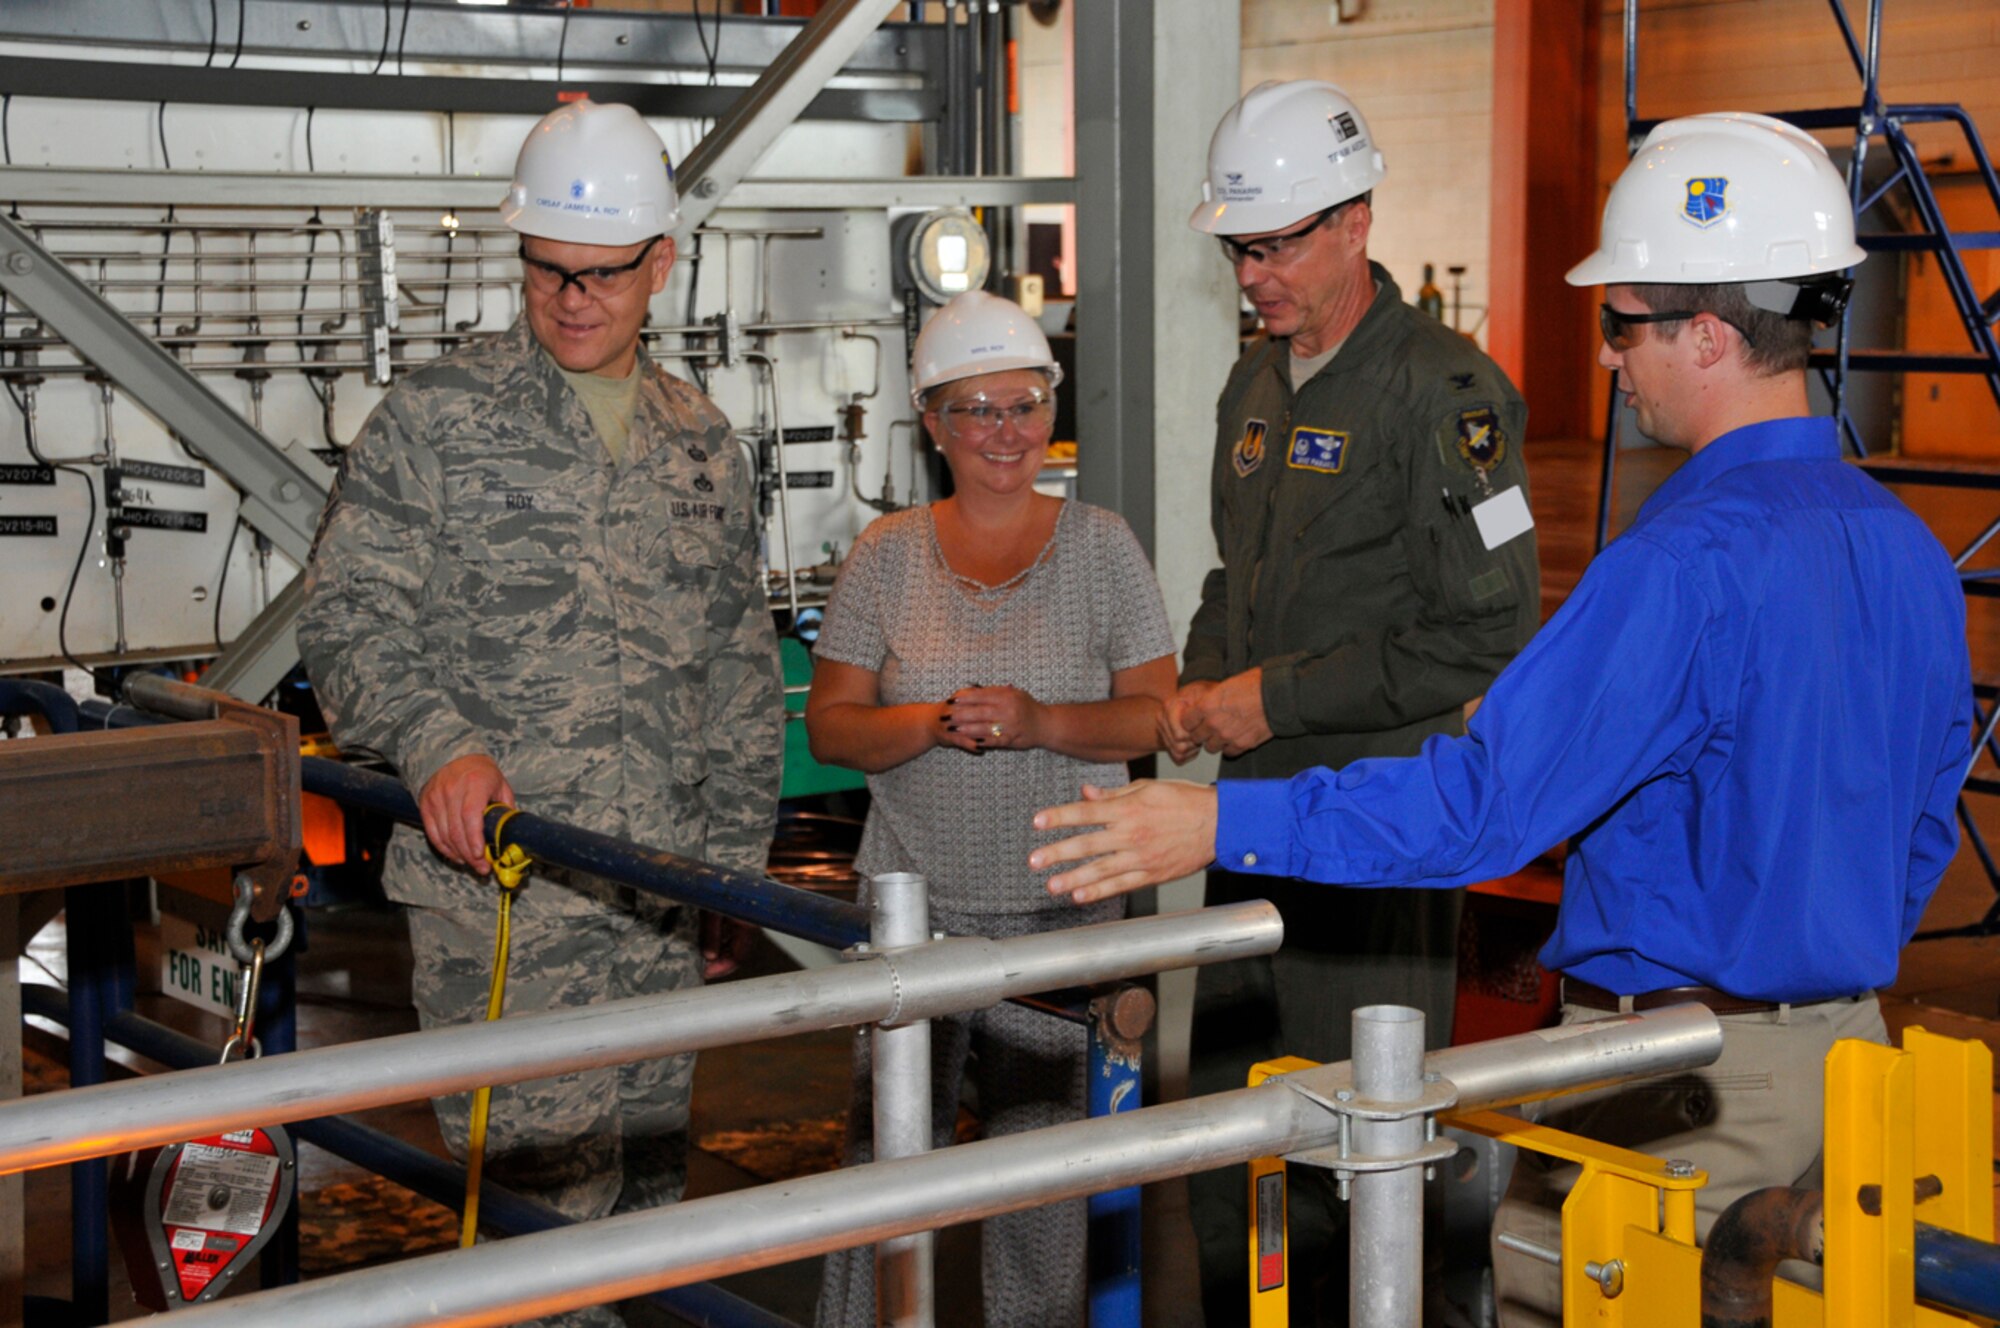 Chief Master Sgt. of the Air Force James Roy, left, and his wife Paula get a tour of AEDC’s Rocket Development Test Cell J-6 from AEDC Commander Col. Michael Panarisi and Richard Kirkpatrick, an aerospace engineer at AEDC. Chief Roy and his wife visited the base July 15. Chief Roy represents the highest enlisted level of leadership in the Air Force and represents the interests of the enlisted force. (Photo by Rick Goodfriend)